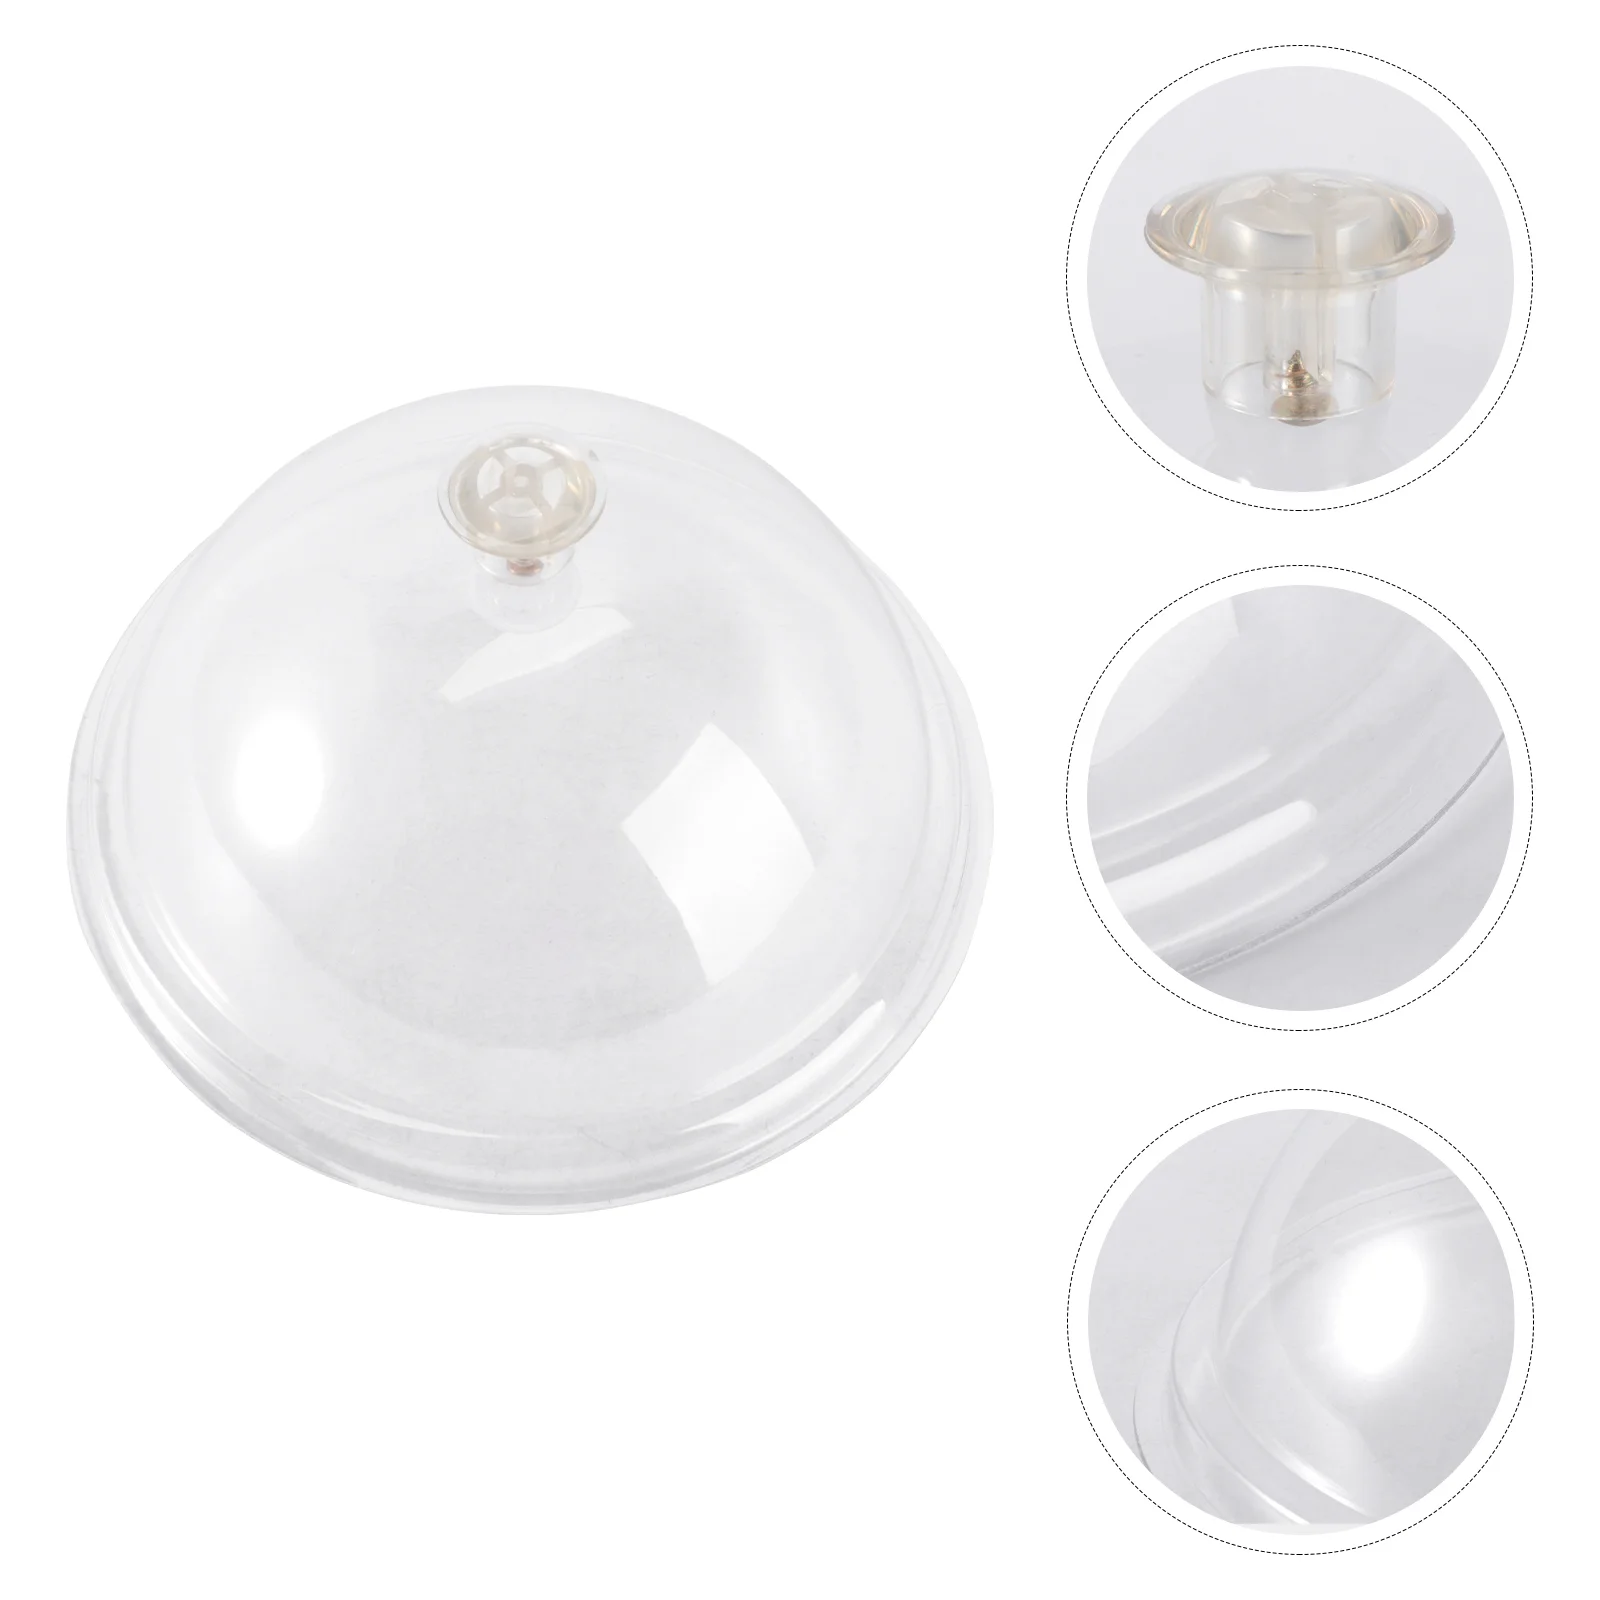 

Cover Dome Cake Display Covers Acrylic Clear Cloche Dessert Outside Round Lid Protector Stand Fly Inch Plate Microwave Platter